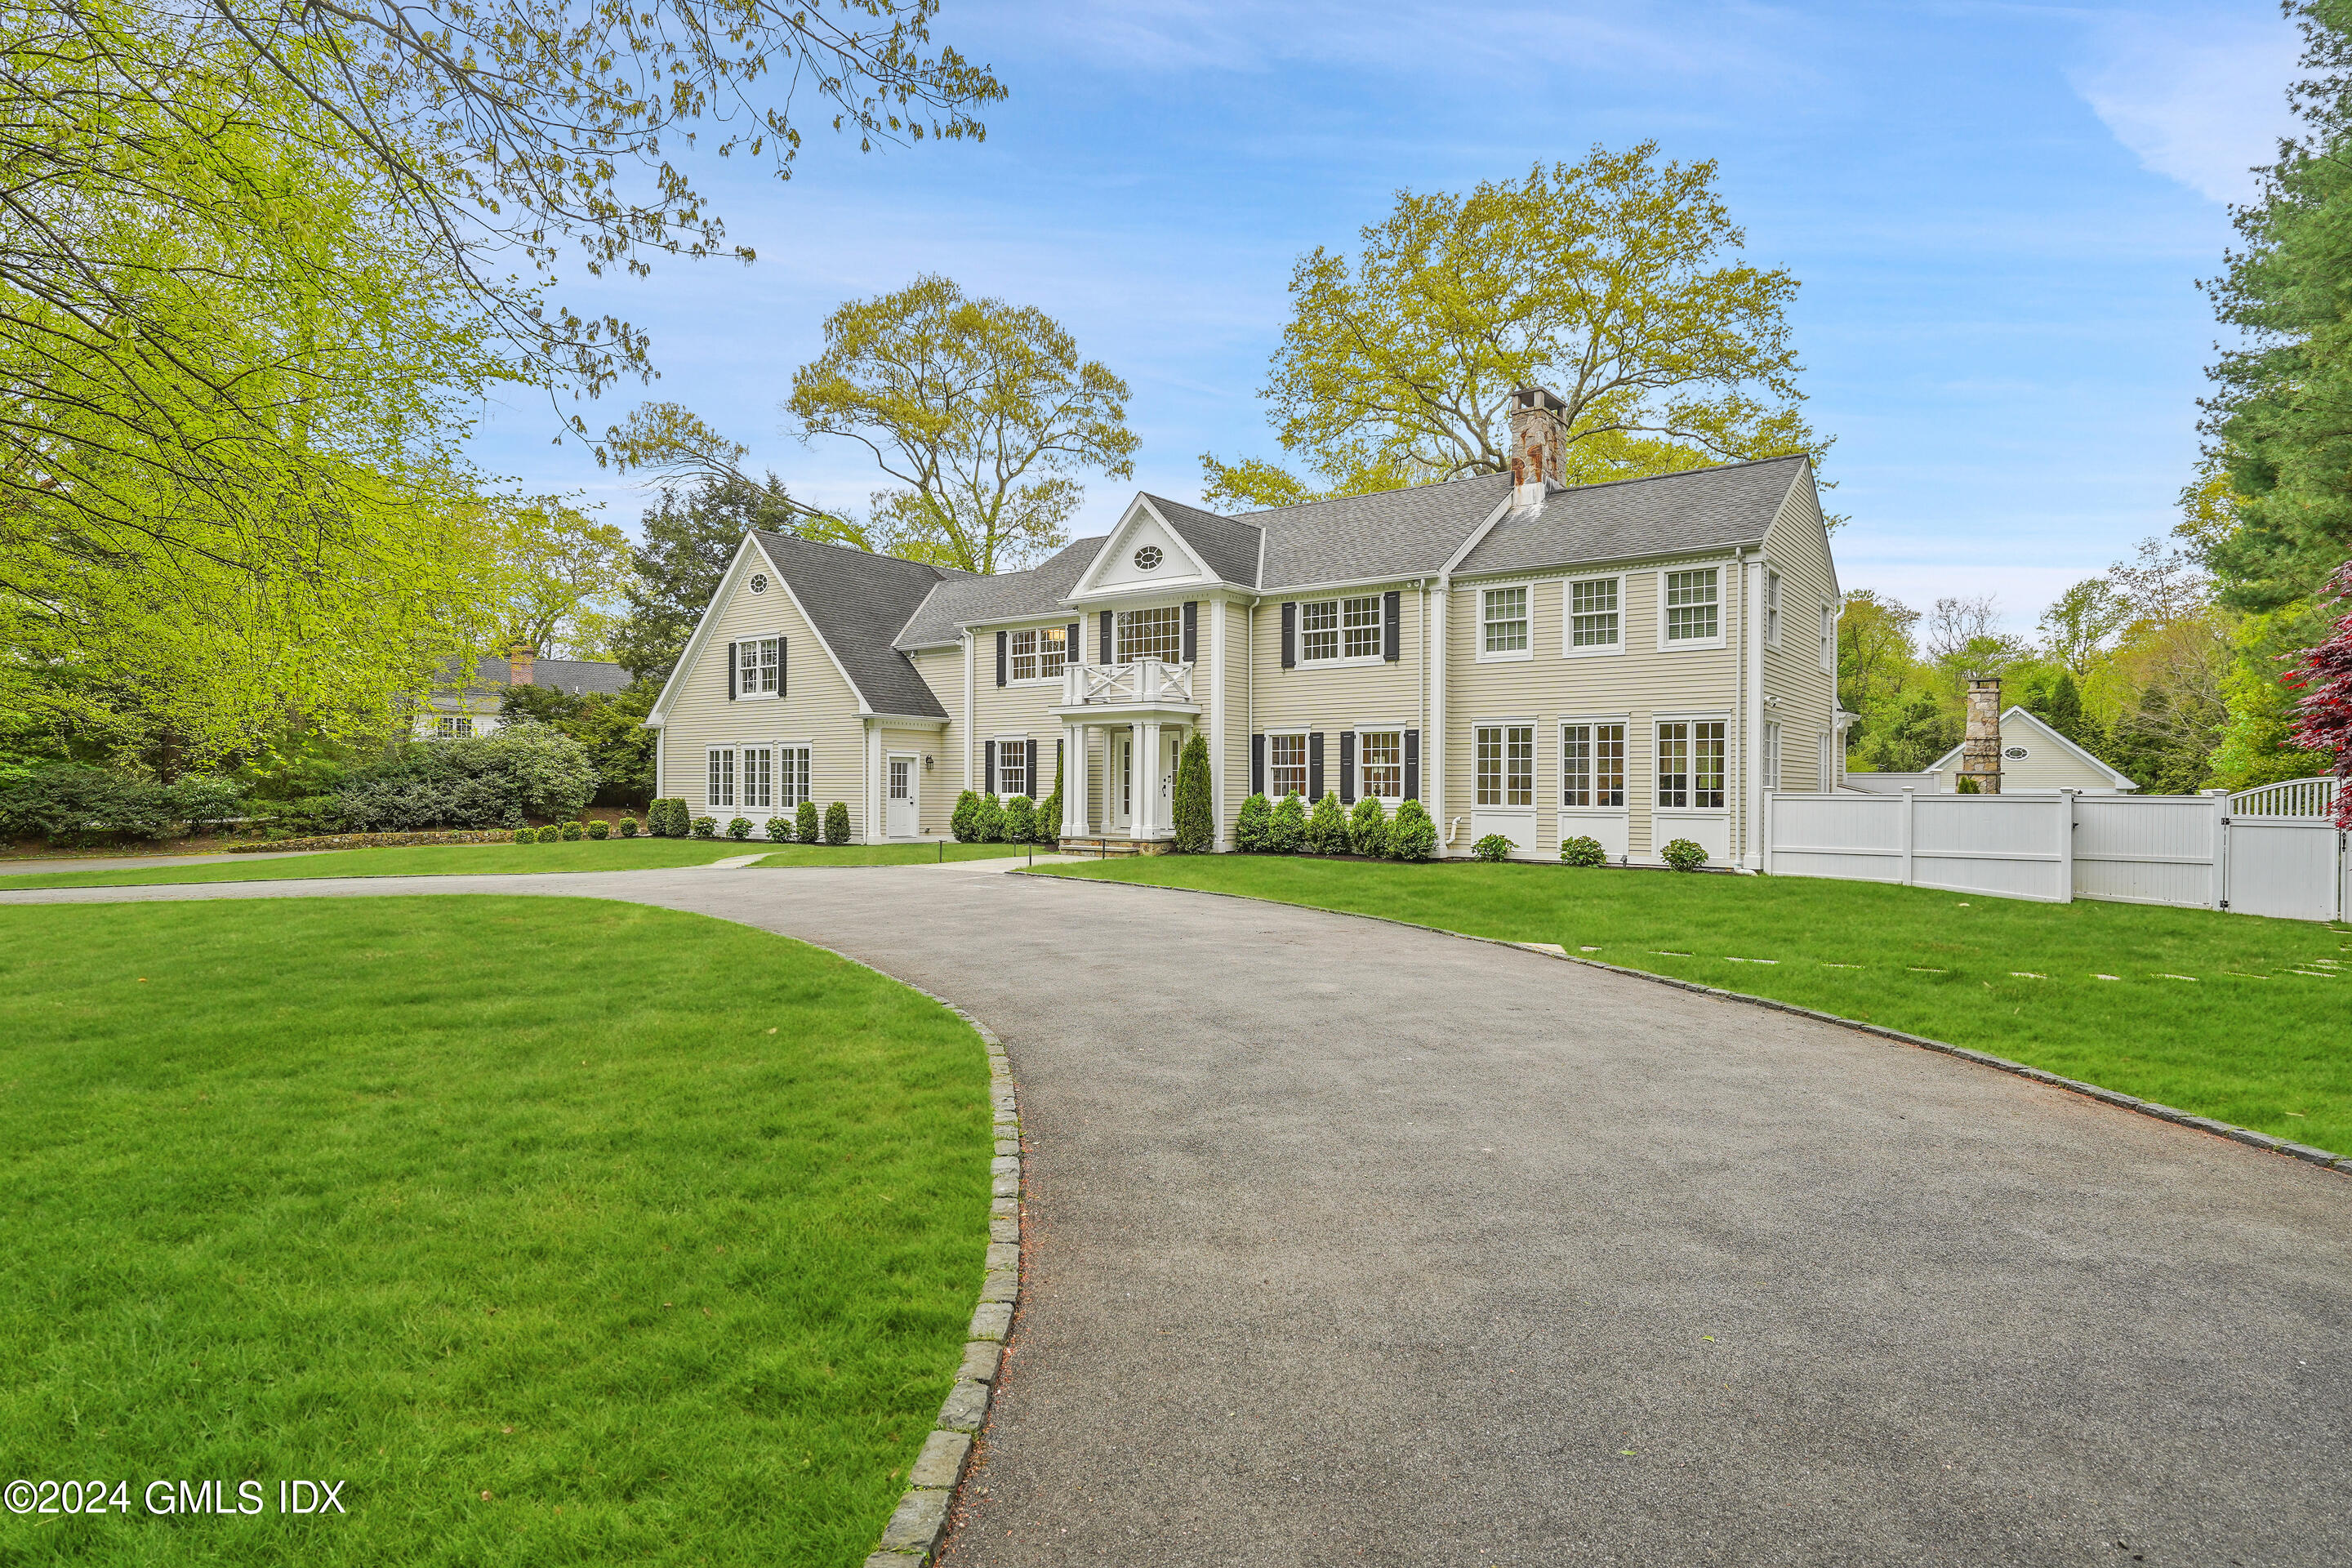 17 Will Merry Lane, Greenwich, Connecticut - 6 Bedrooms  
7 Bathrooms - 